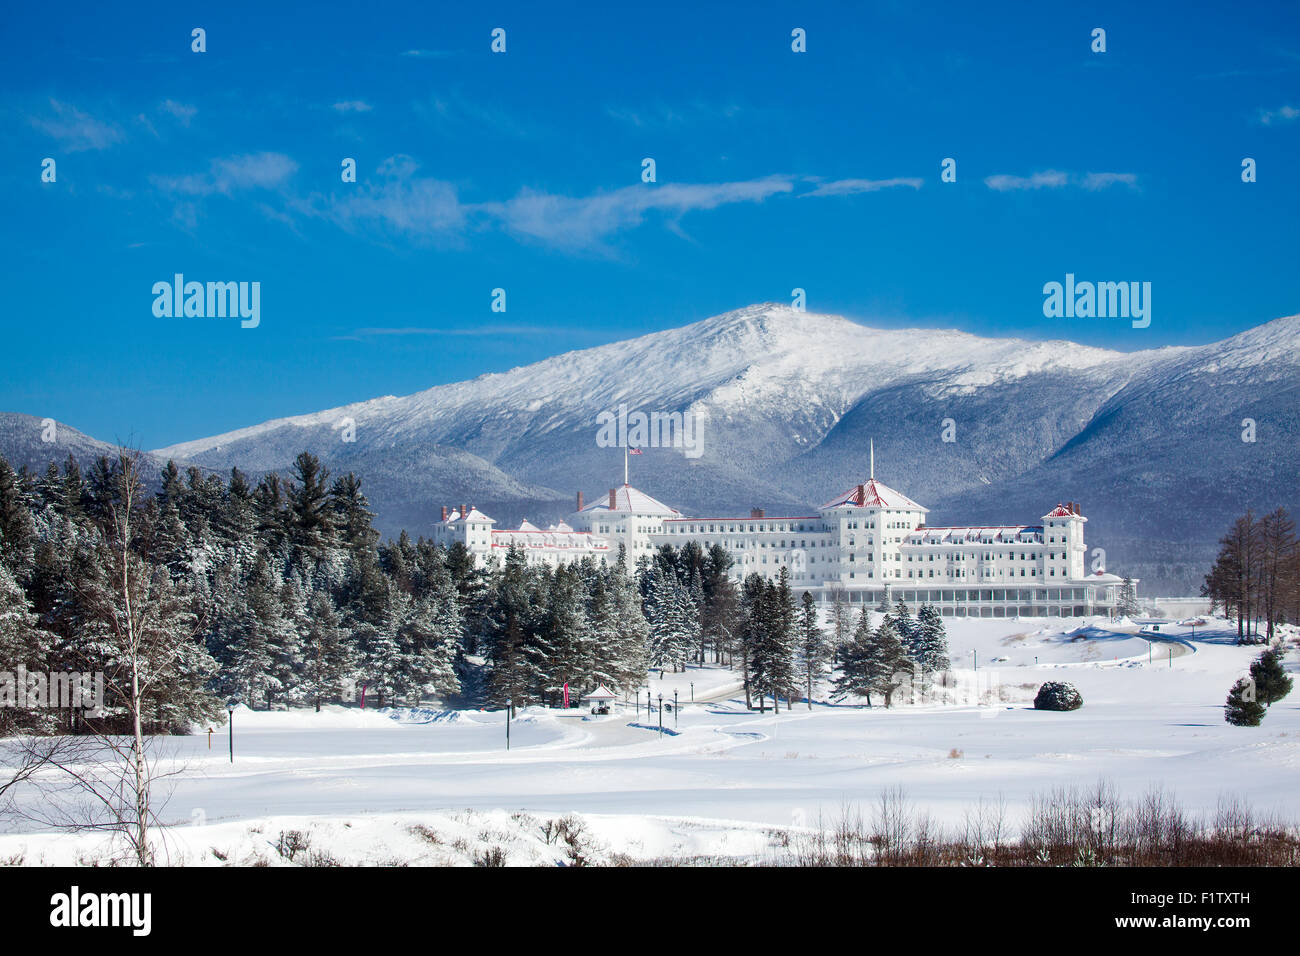 Facade of the majestic Mount Washington Hotel in winter with the White Mountains in the background. Bretton Woods, NH, USA. Stock Photo